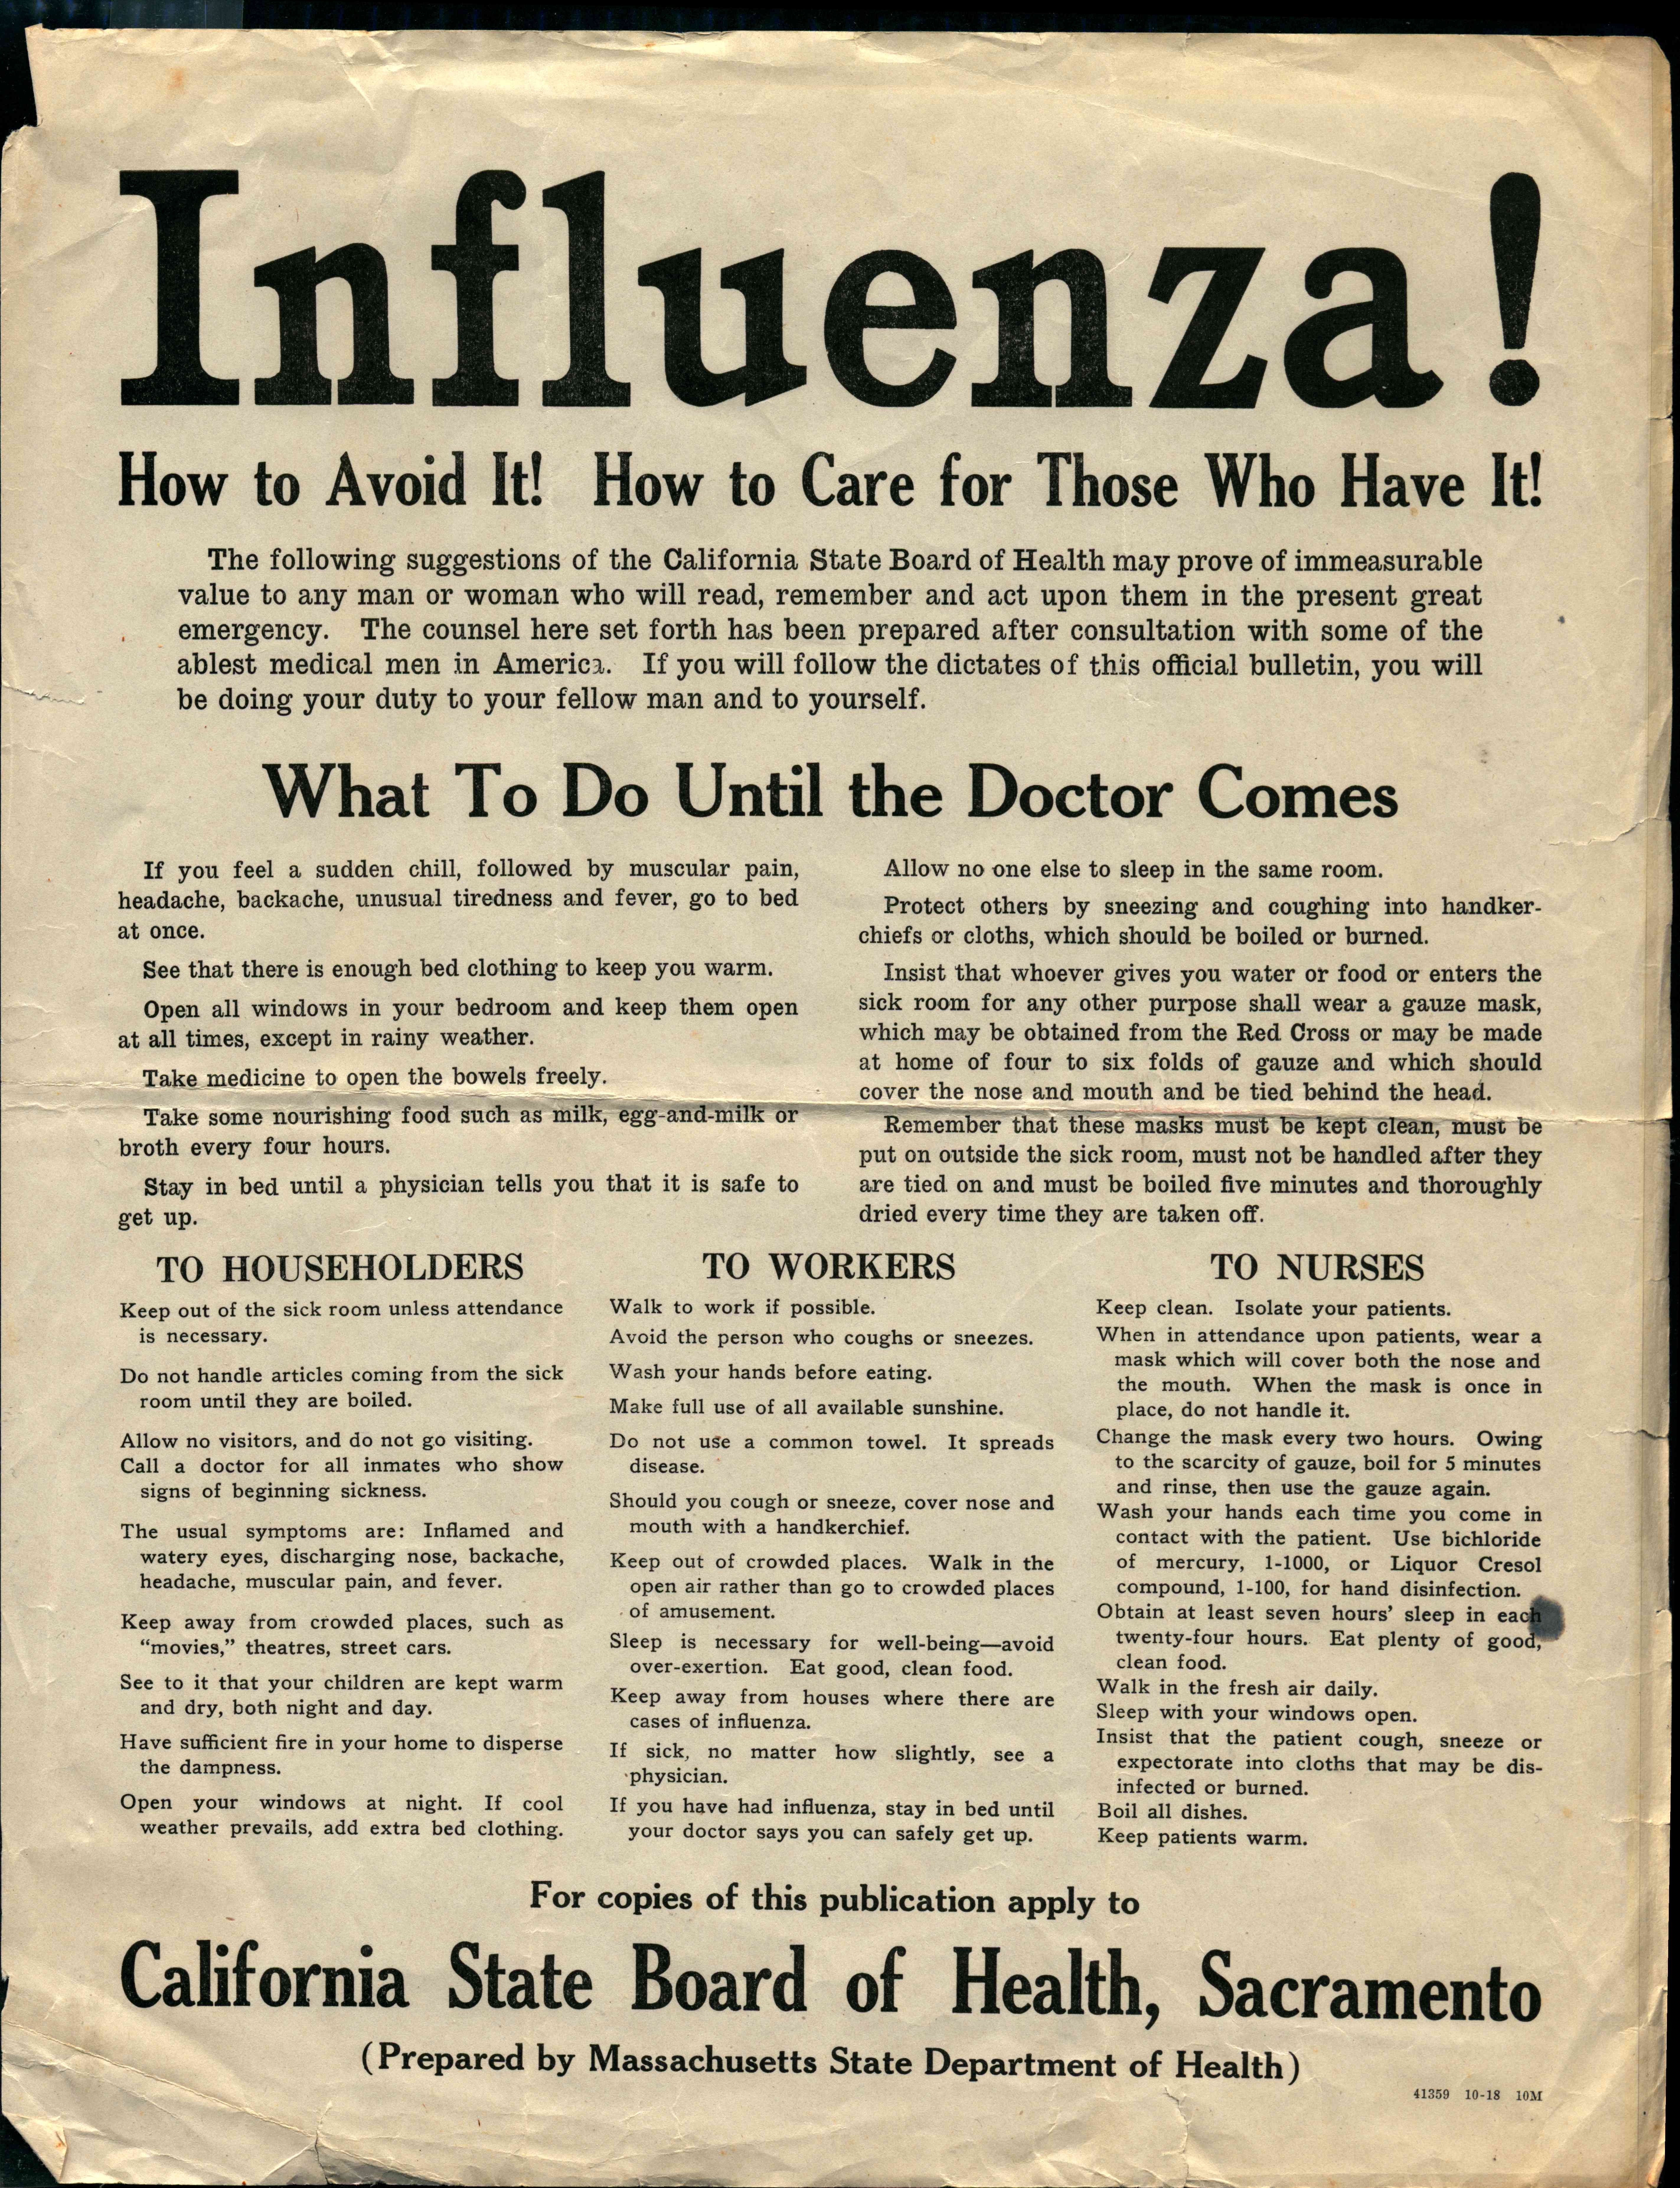 Textual poster on Influenza, advising how to avoid it and how to care for those who have it. Contains nail holes from having been posted. (Prepared by Massachusetts State Department of Health)